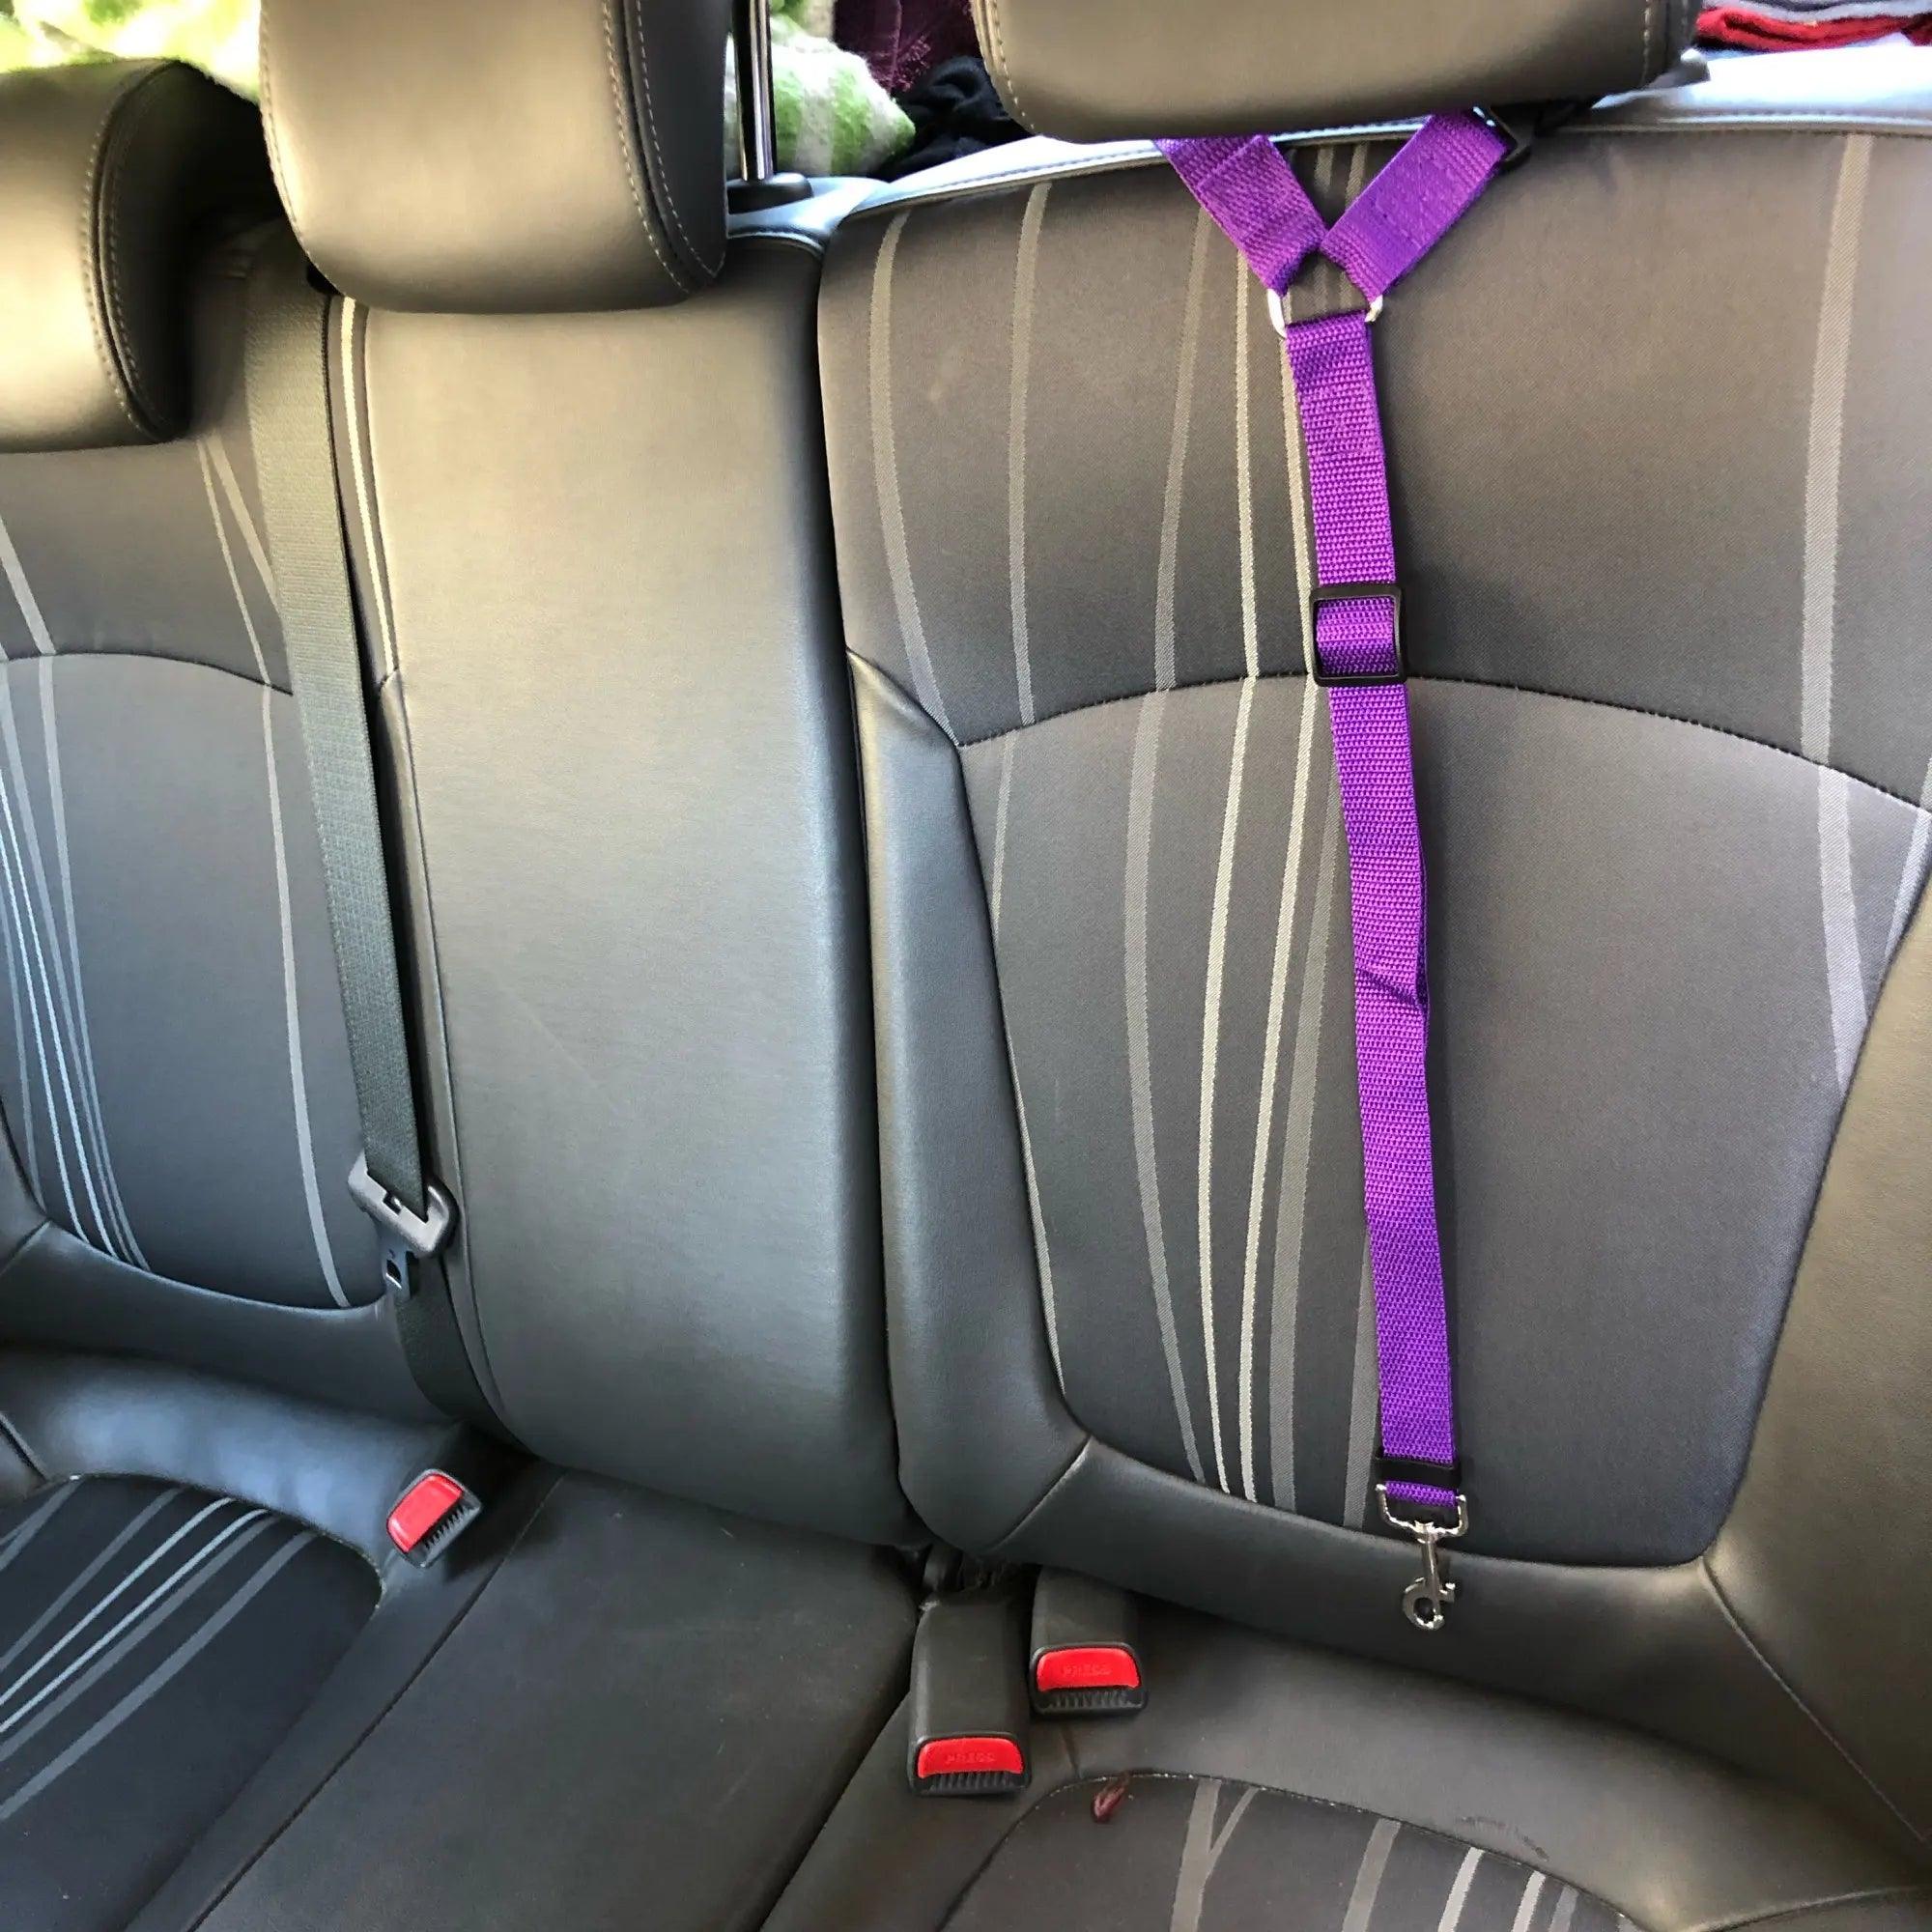 Pet Car Safety Belt with Adjustable Harness and Leash  ourlum.com   